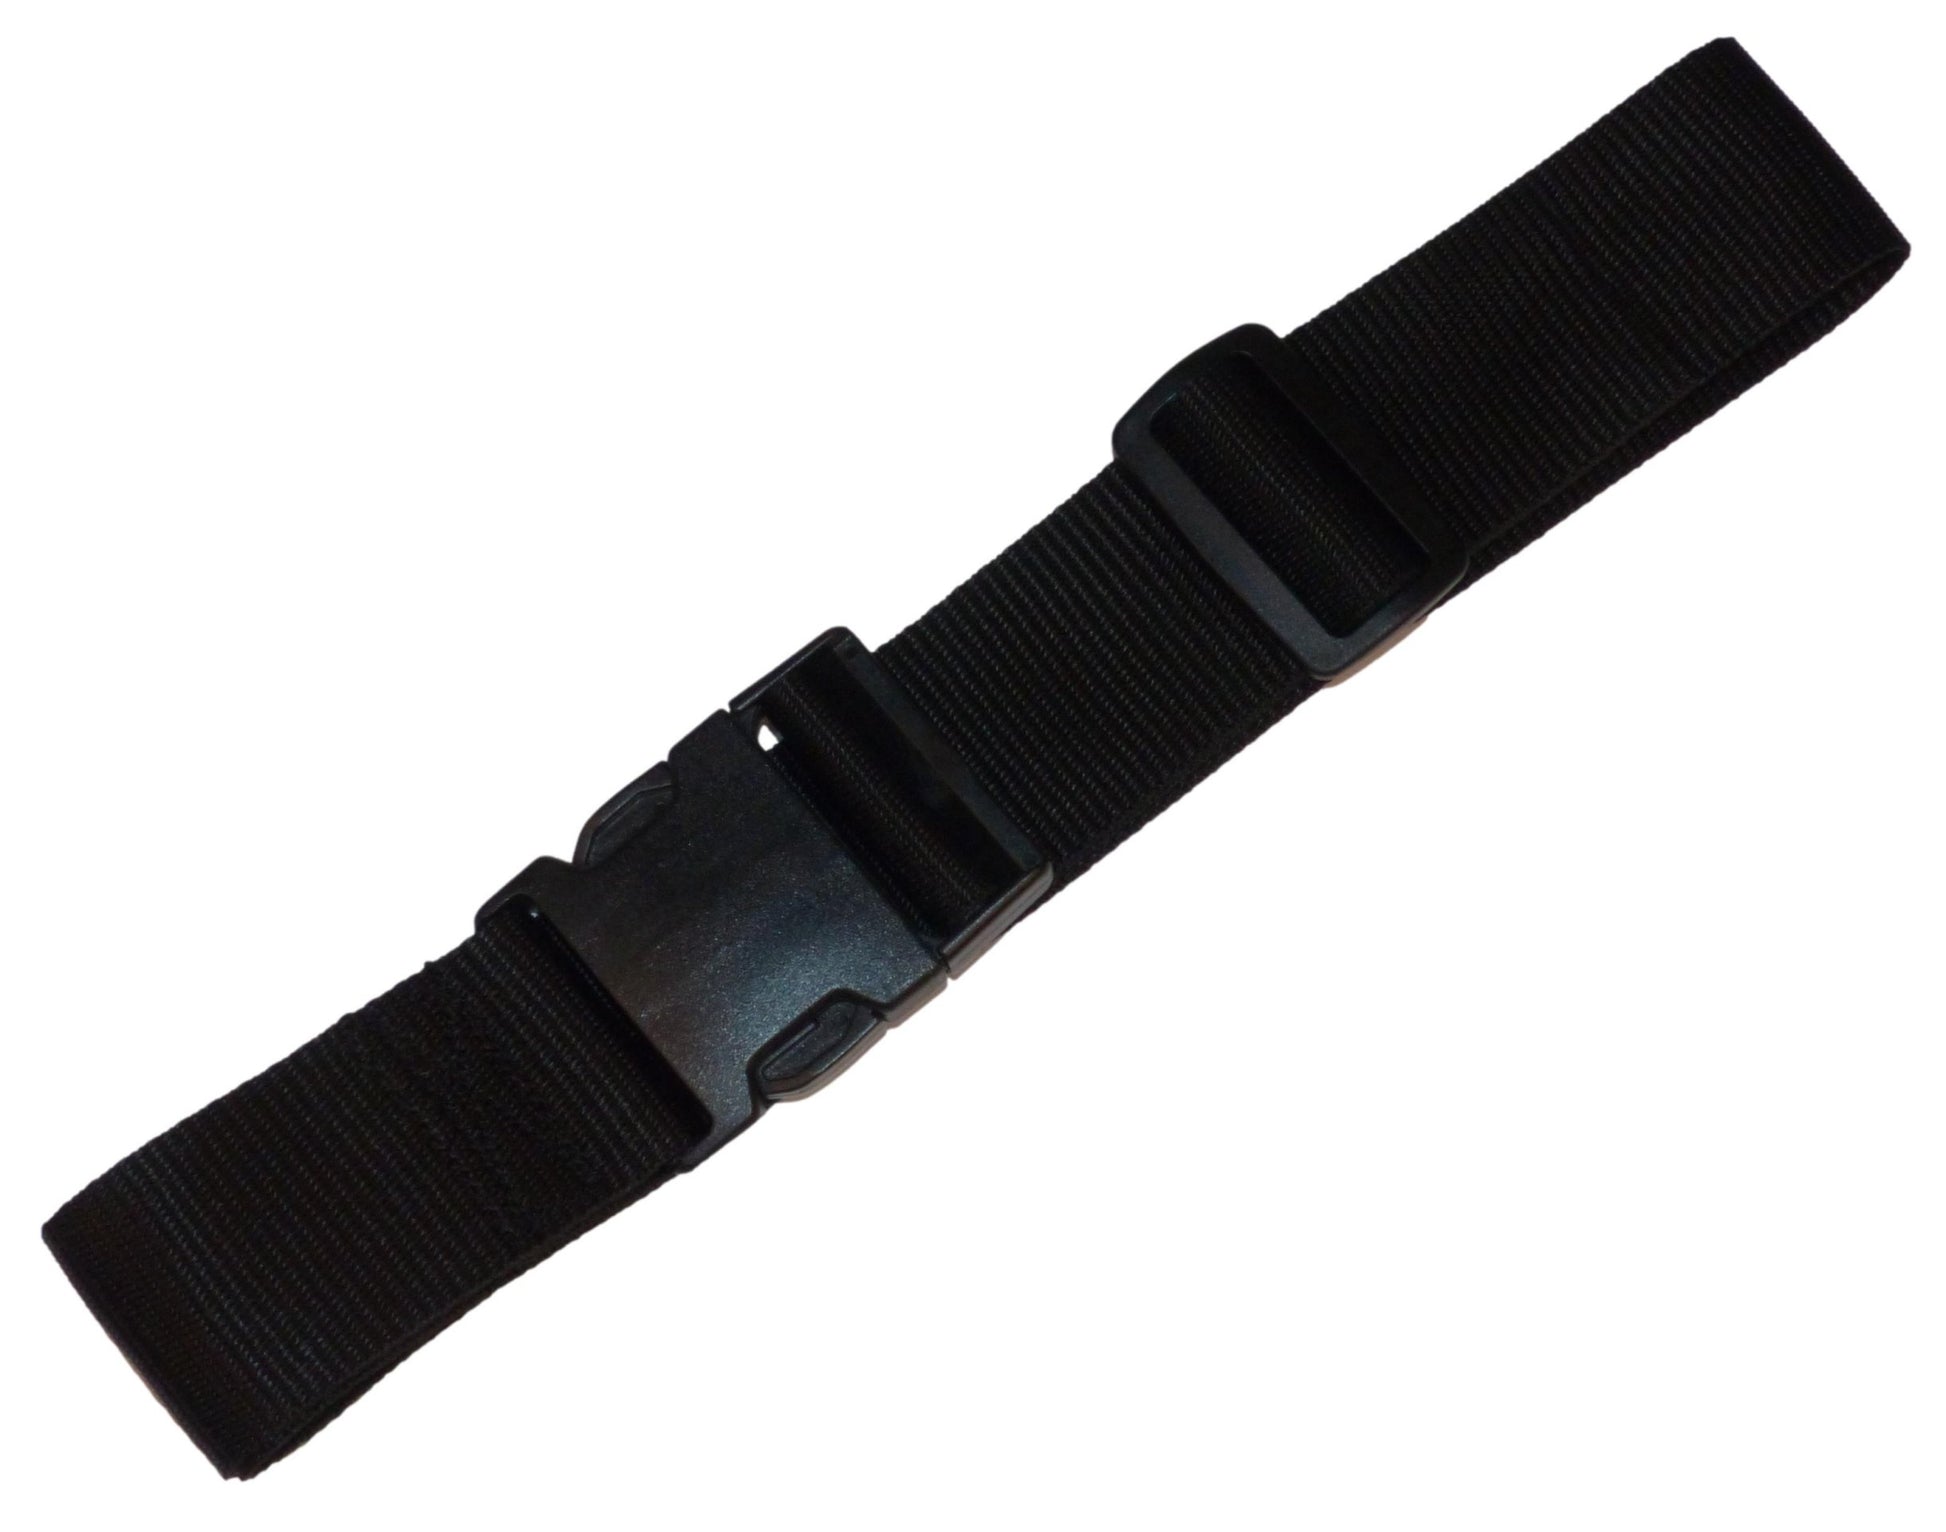 Benristraps 50mm Webbing Strap with Quick Release Buckle in black